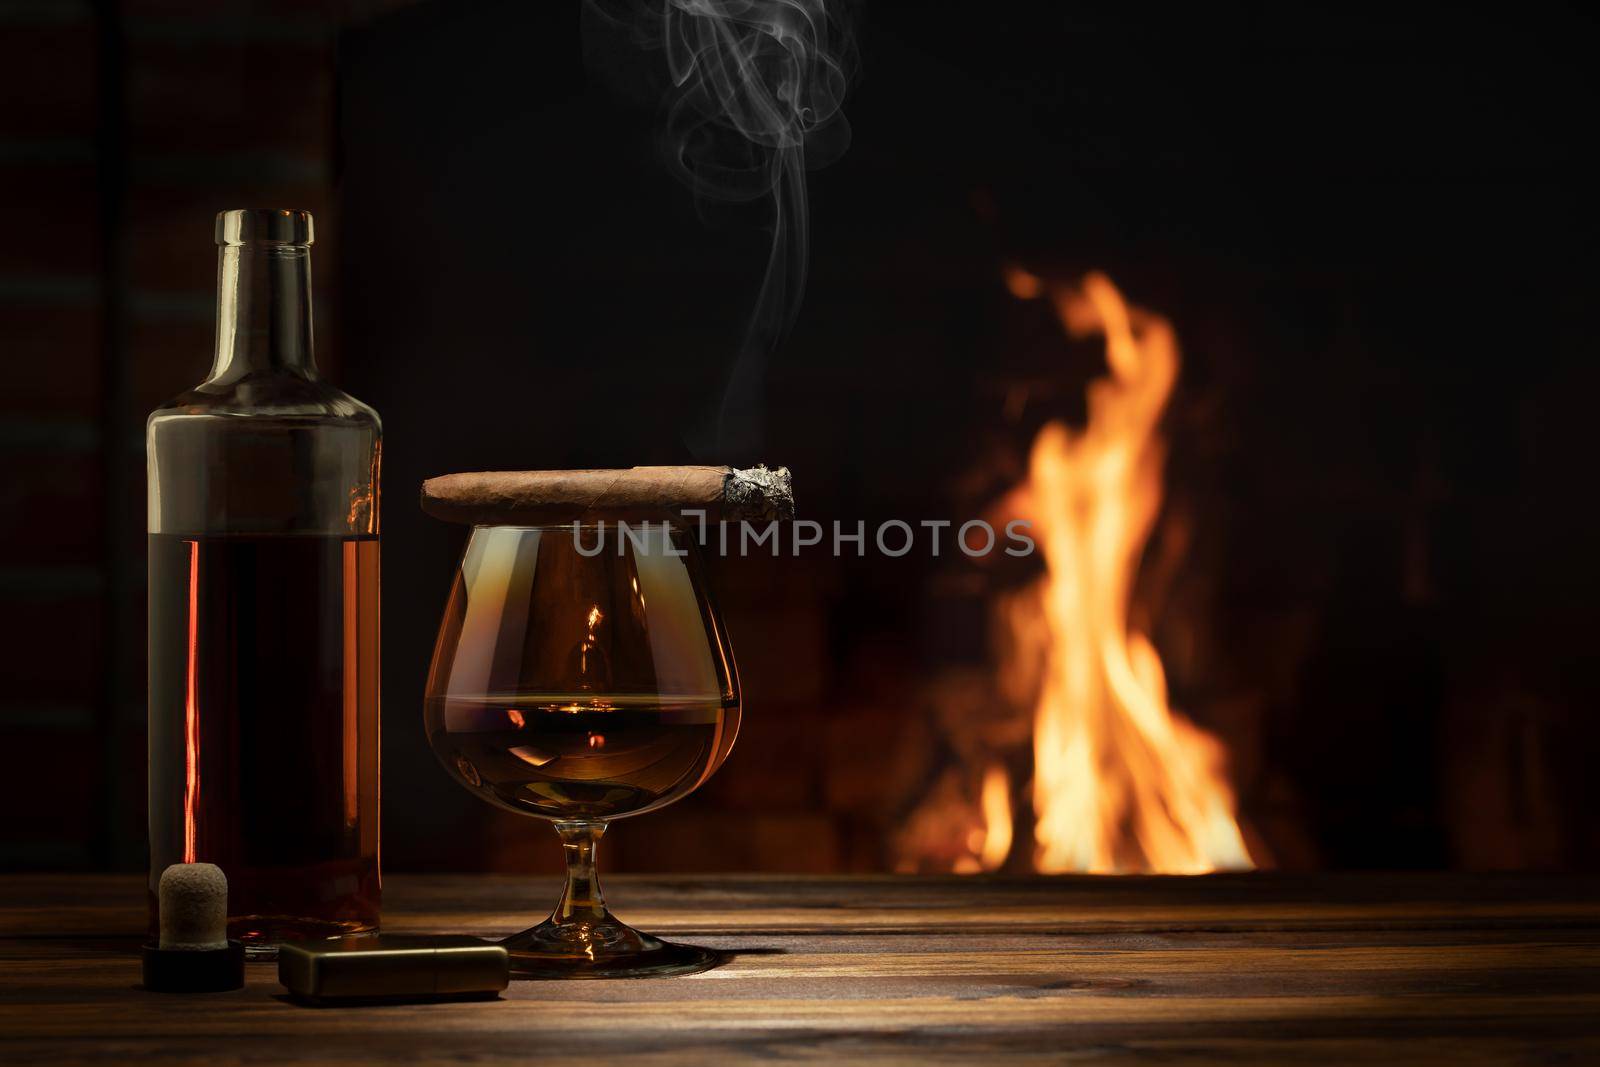 Glass of cognac, a cigar, a bottle on the table near the burning fireplace. Relaxation and enjoyment concept.